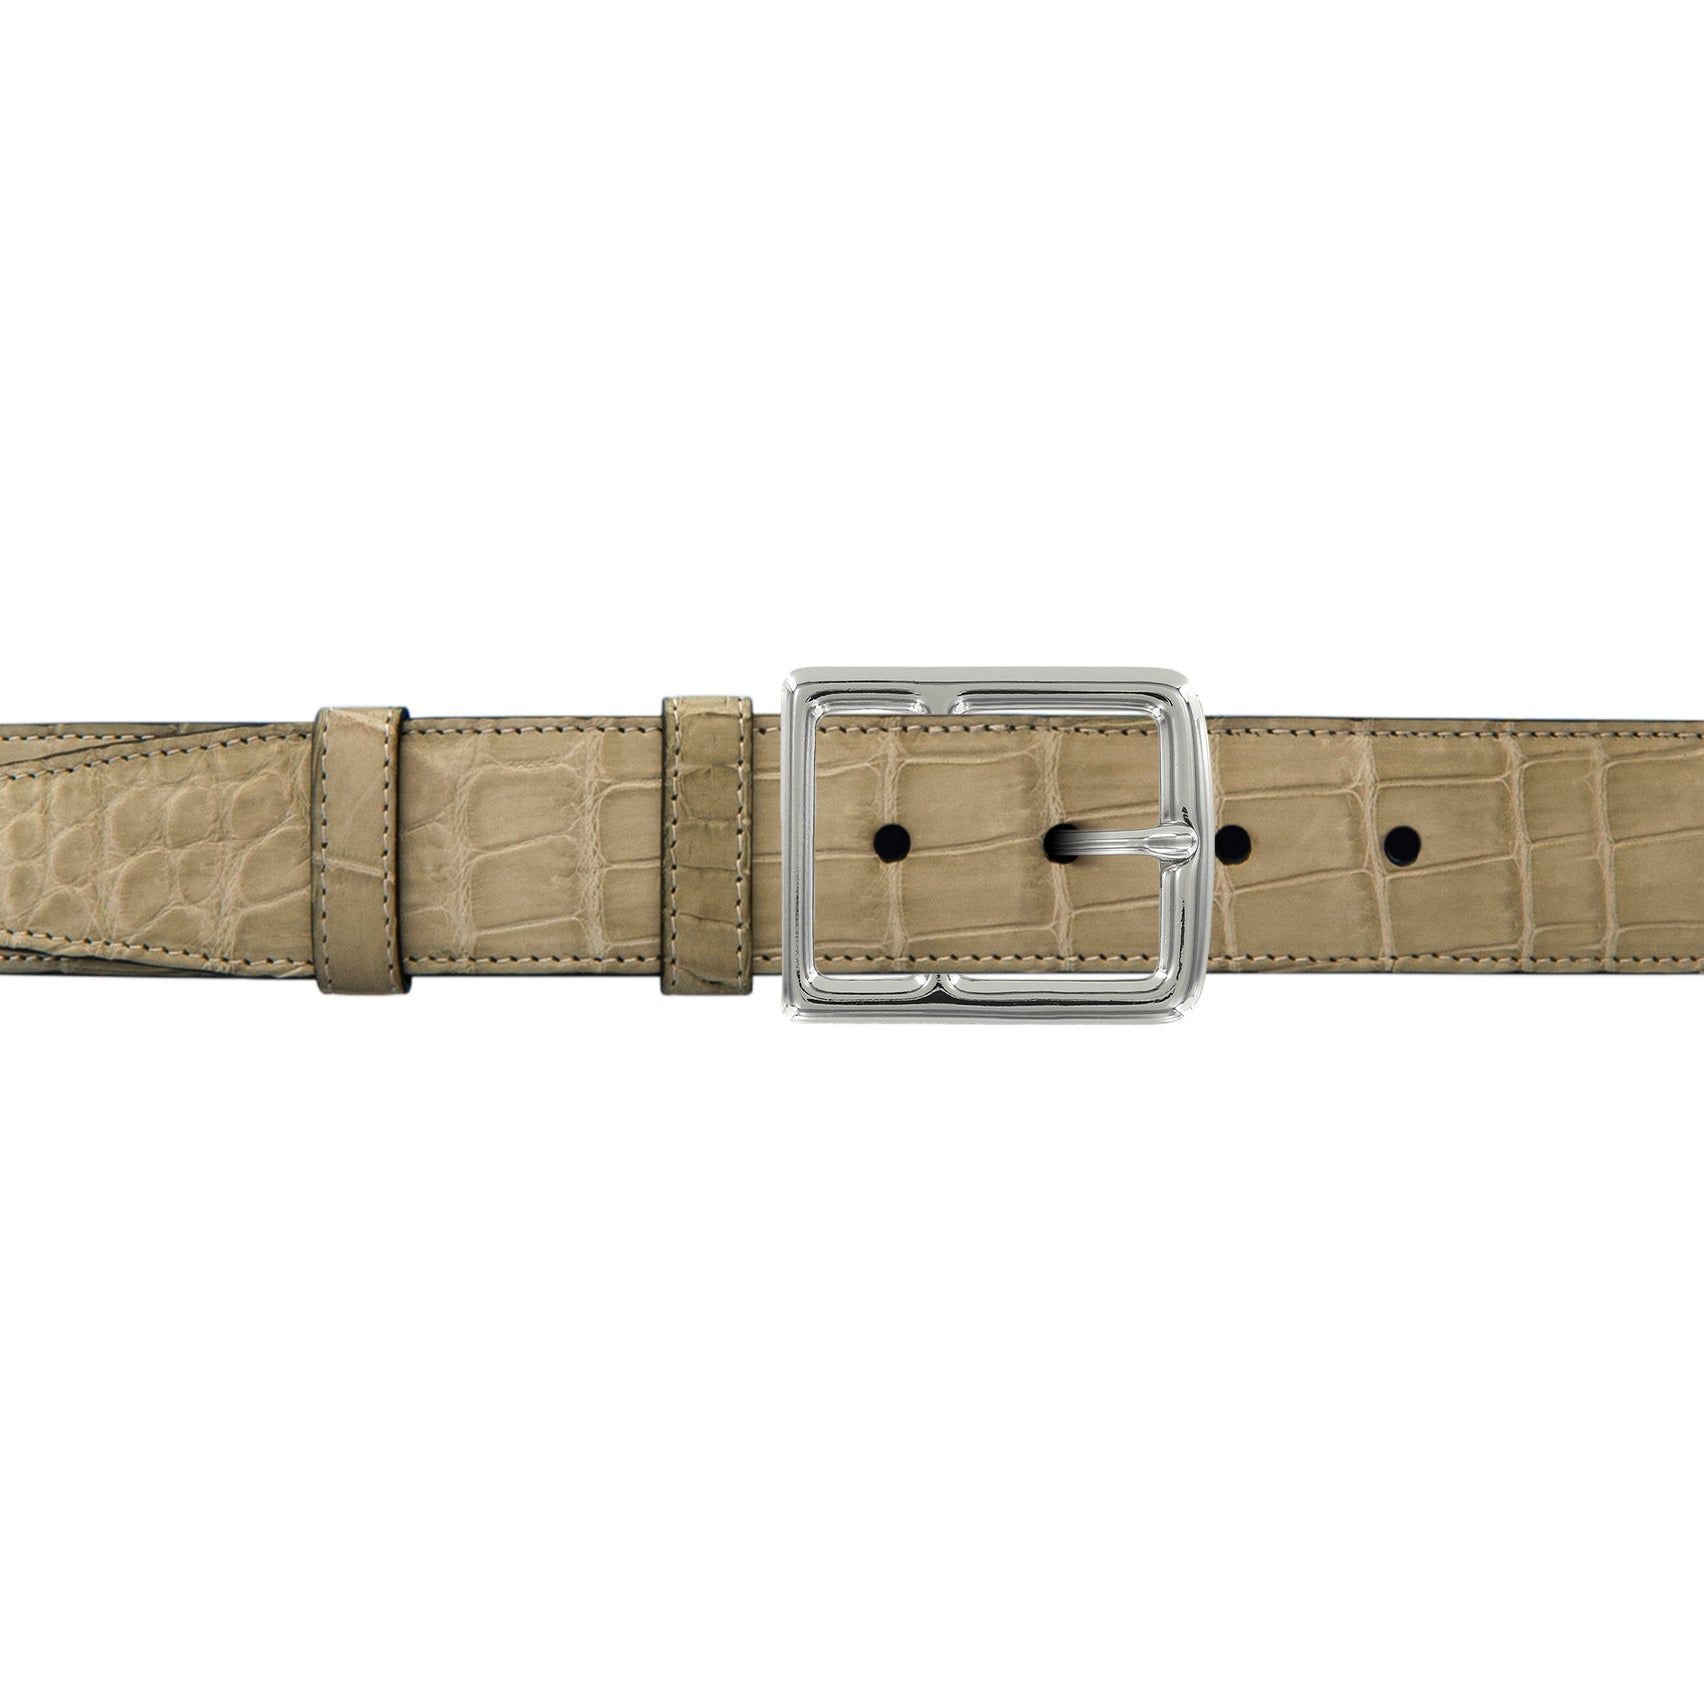 1 1/2" Sand Classic Belt with Crawford Casual Buckle in Polished Nickel